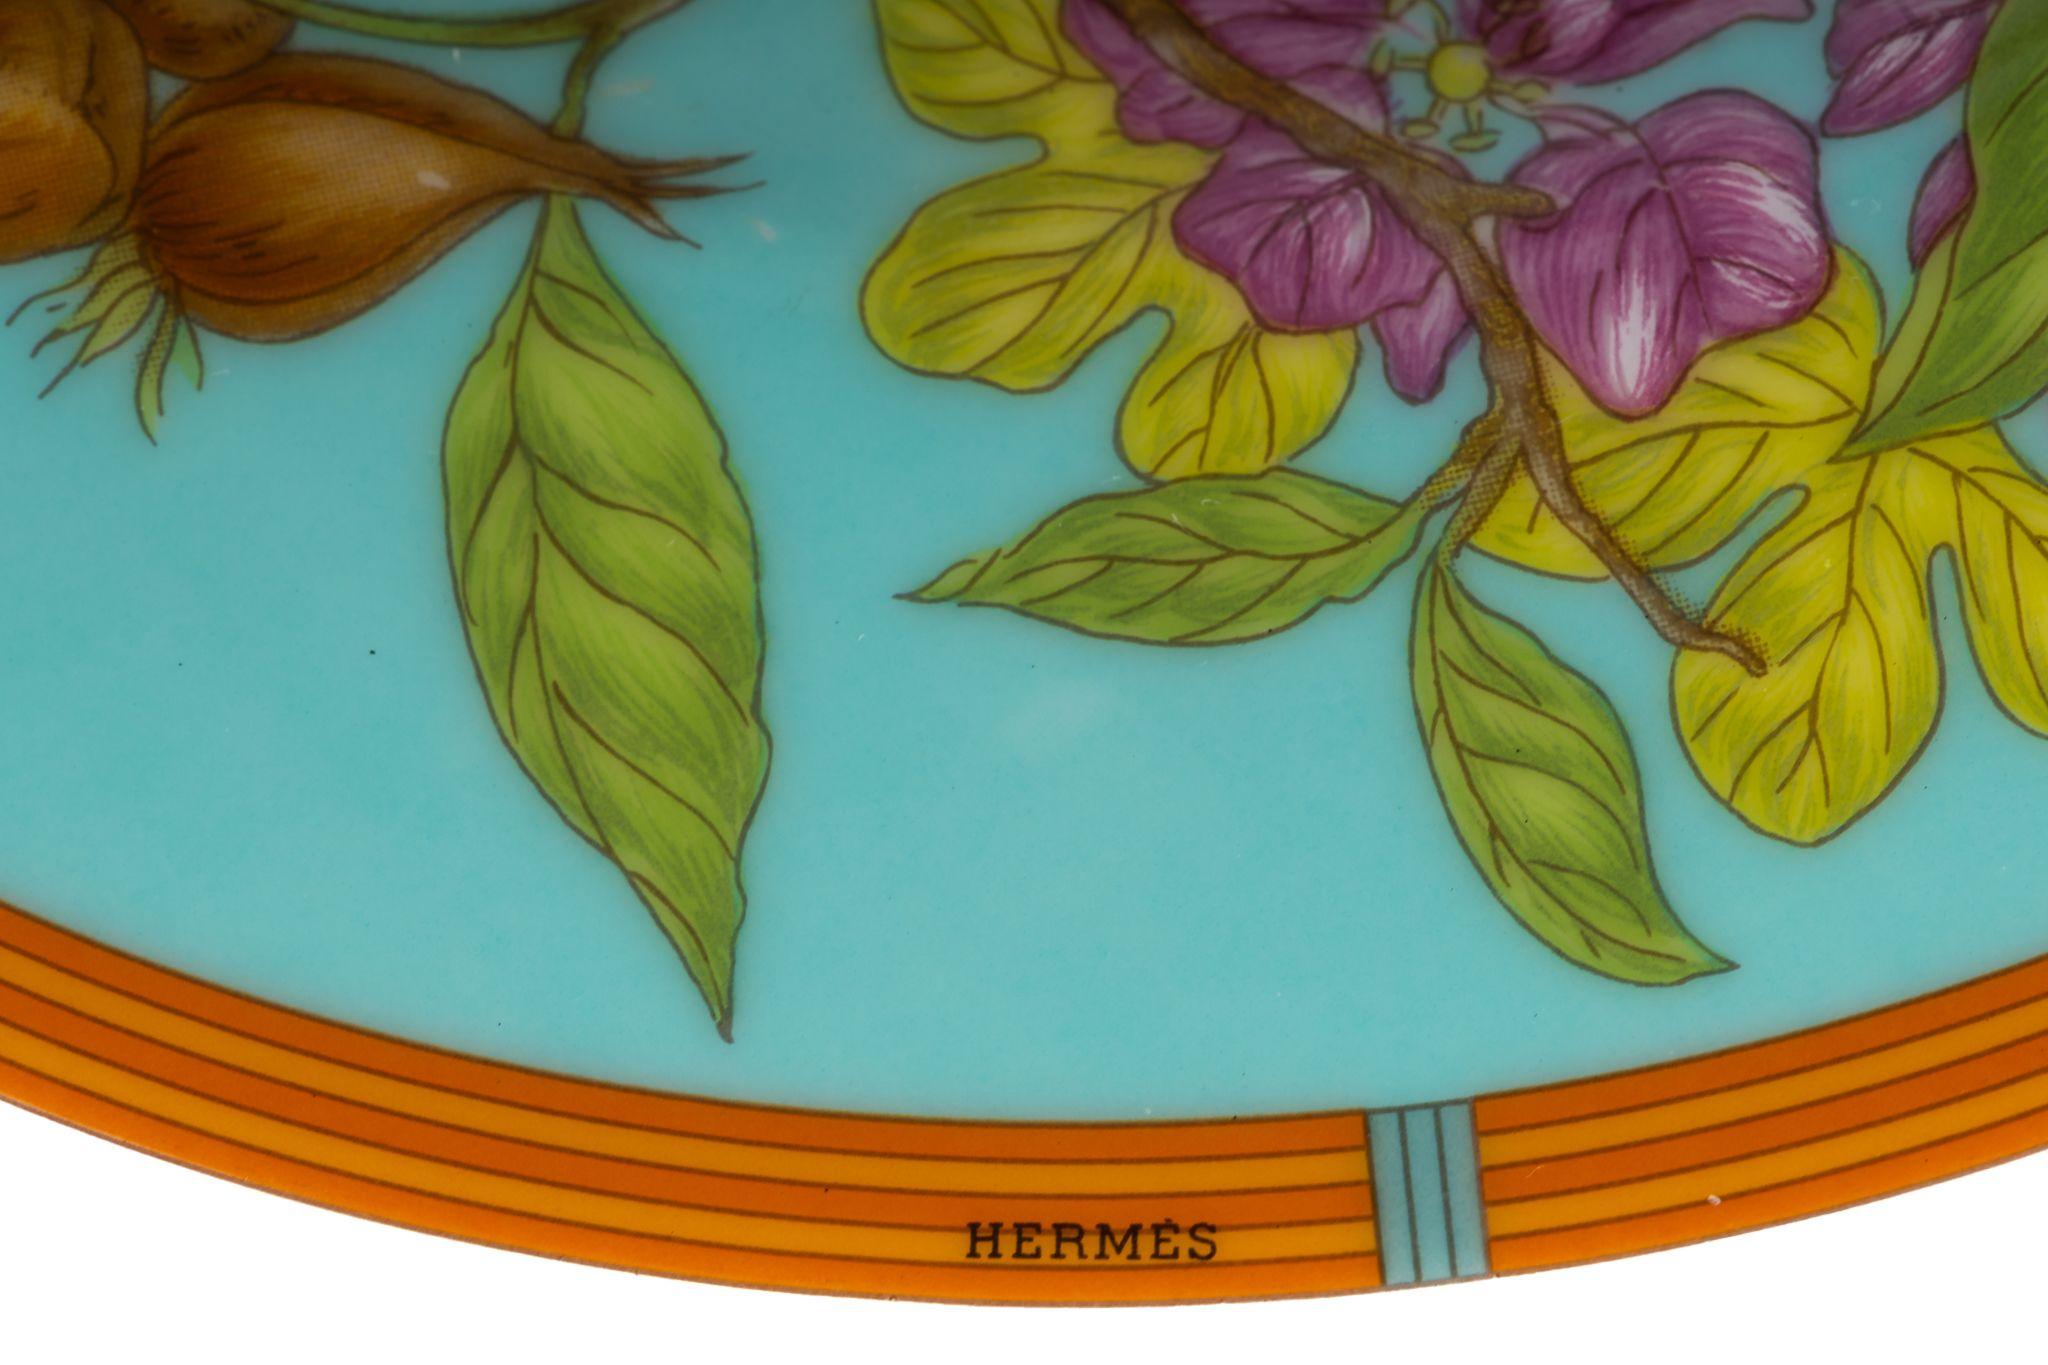 Hermès Siesta Island Dessert Plate In Excellent Condition For Sale In West Hollywood, CA